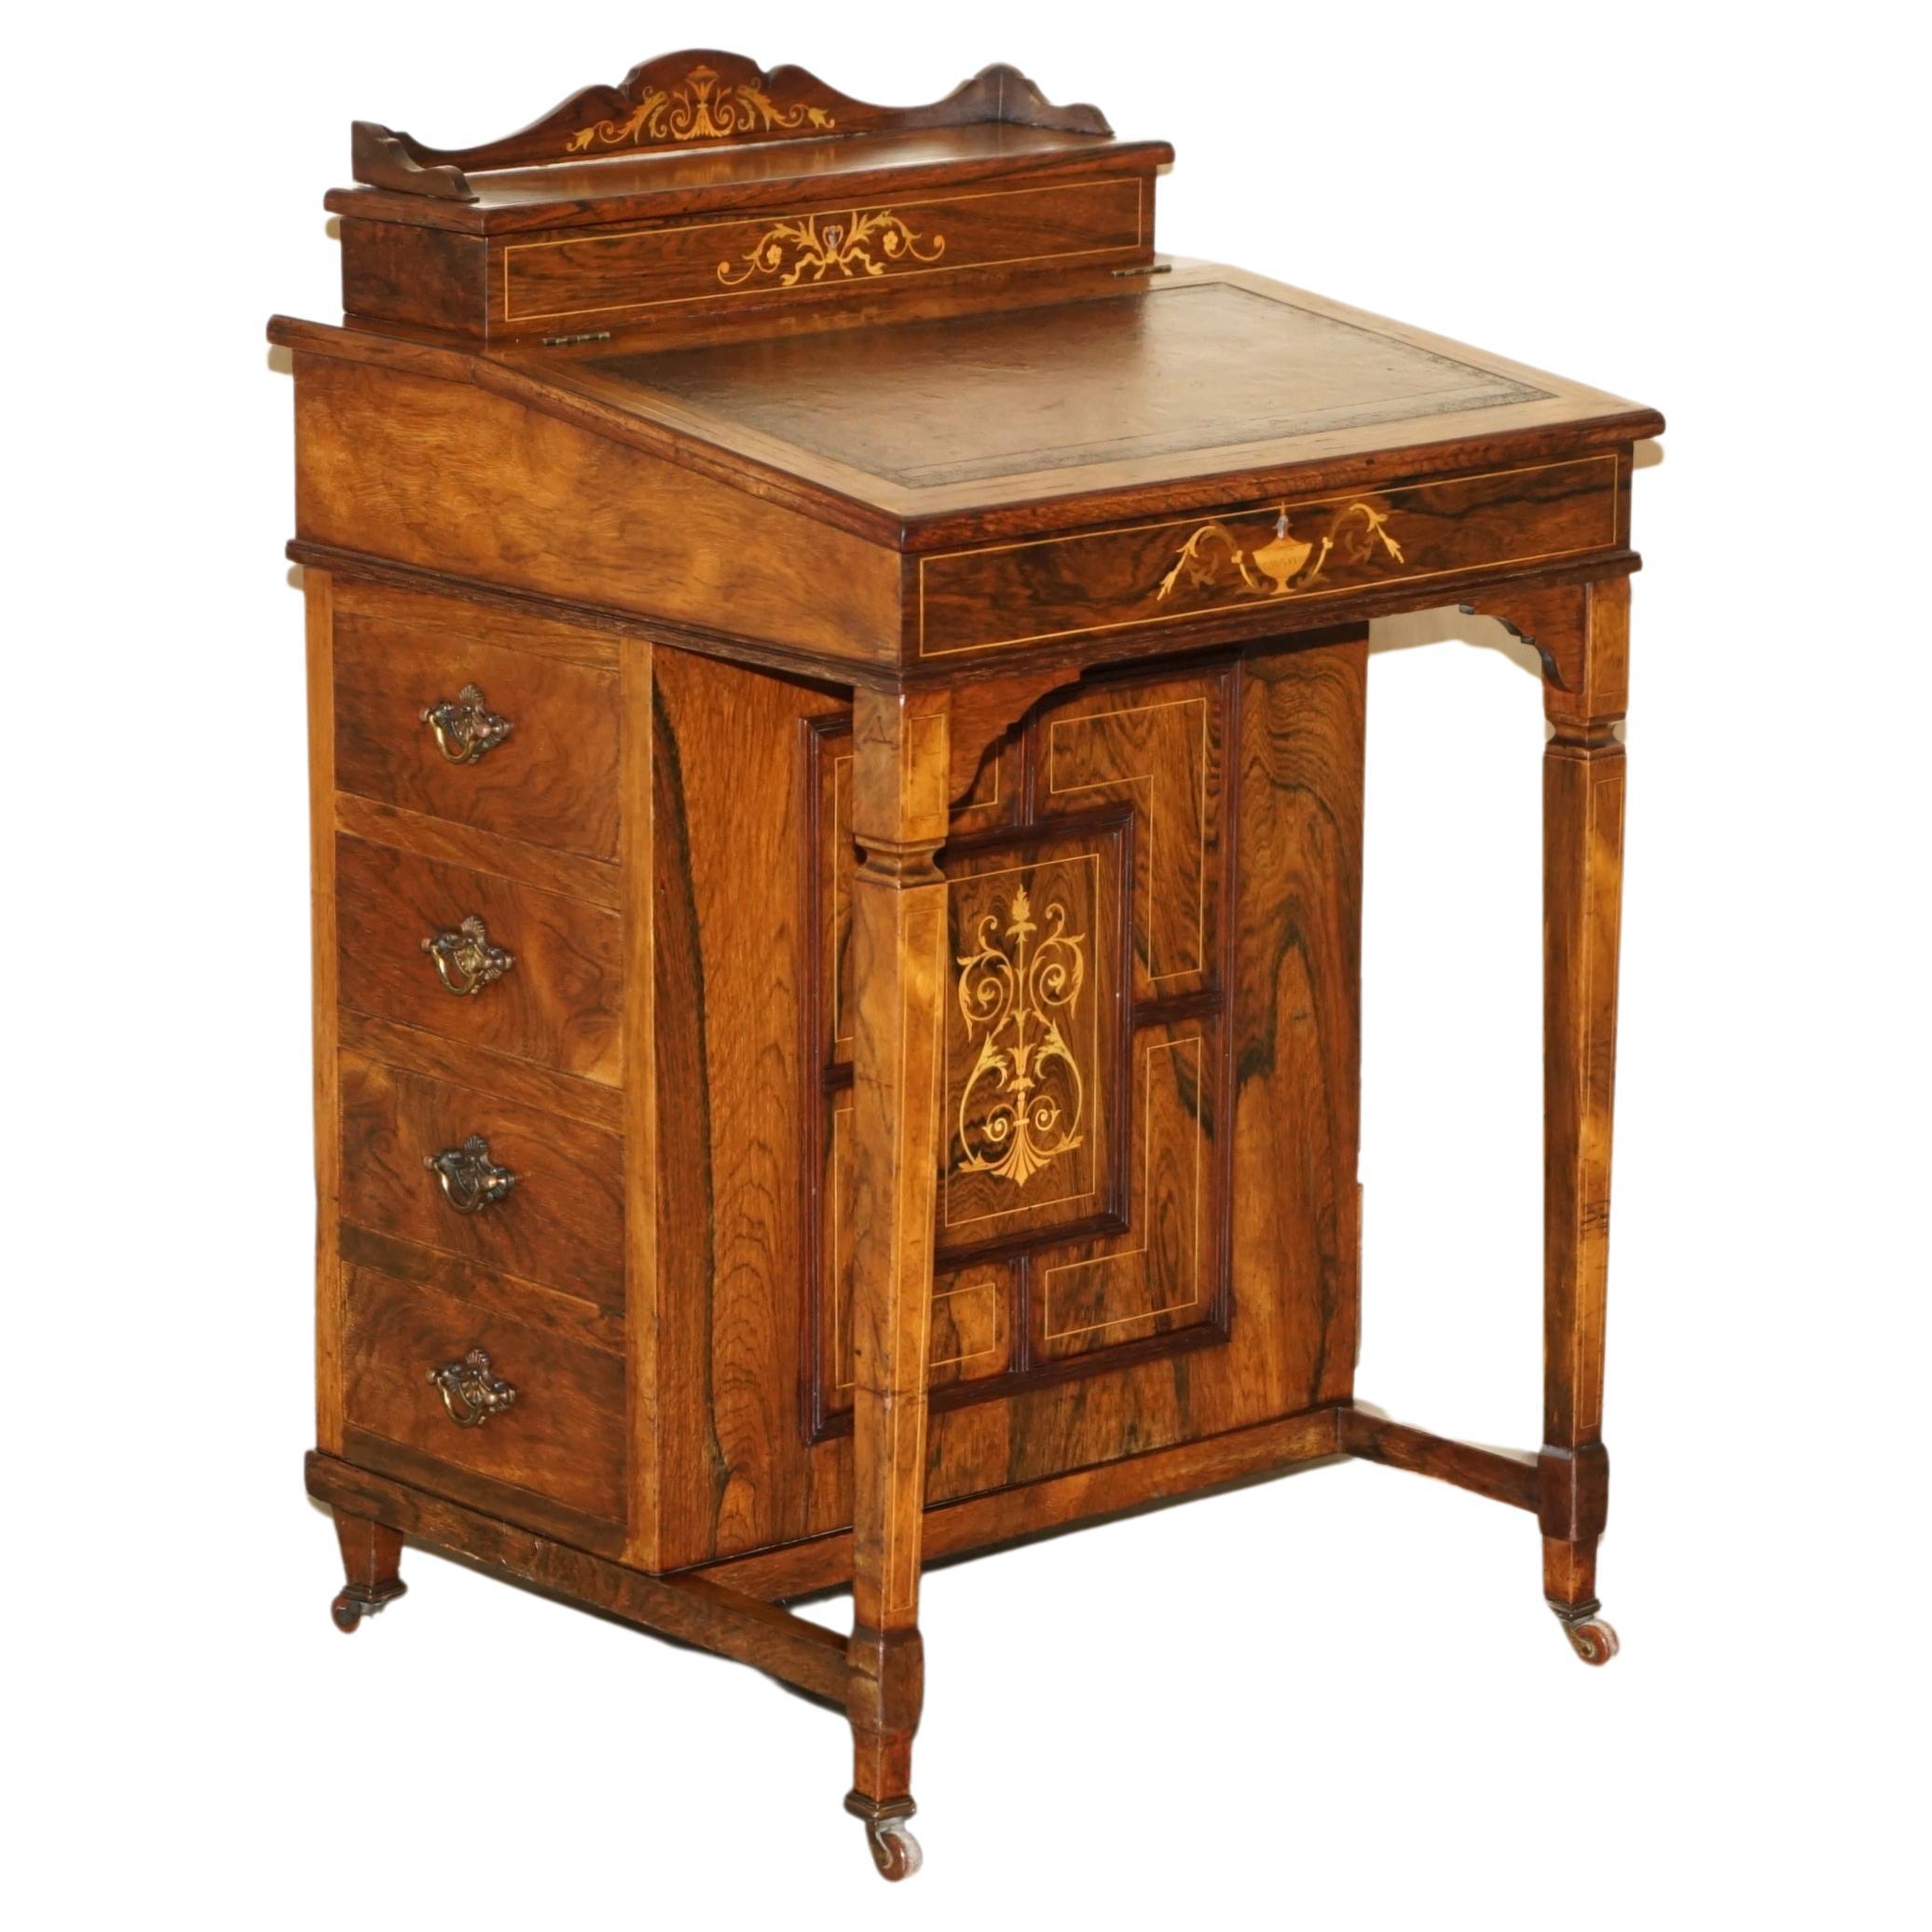 Royal House Antiques

Royal House Antiques is delighted to offer for sale this stunning lightly restored Victorian Rosewood with Marquetry inlay Davenport desk finished with a hand dyed brown leather top 

Please note the delivery fee listed is just